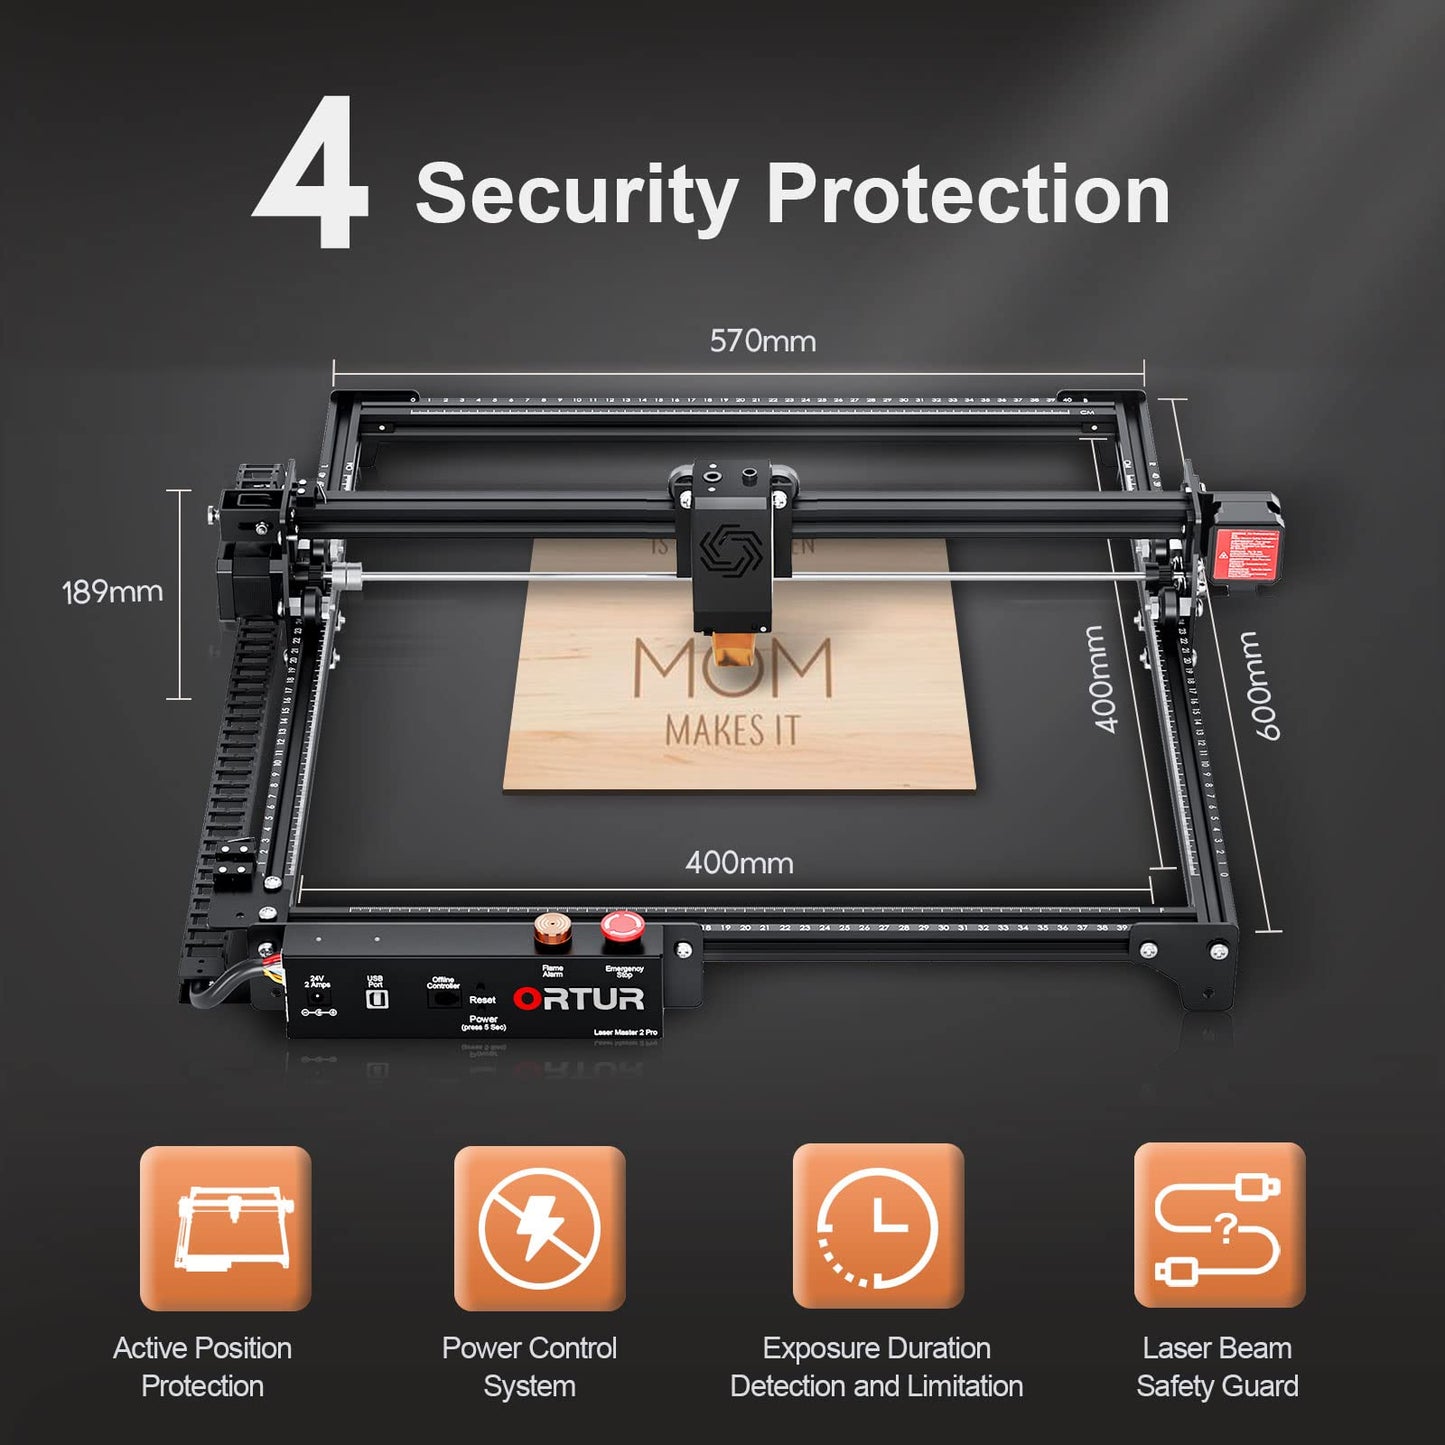 ORTUR Laser Master 2 Pro S2 LU2-10A,10W Output Power Laser Engraver and Cutter, 0.05 x 0.1mm Compressed Spot Laser Engraver for Wood and Metal, 400 x